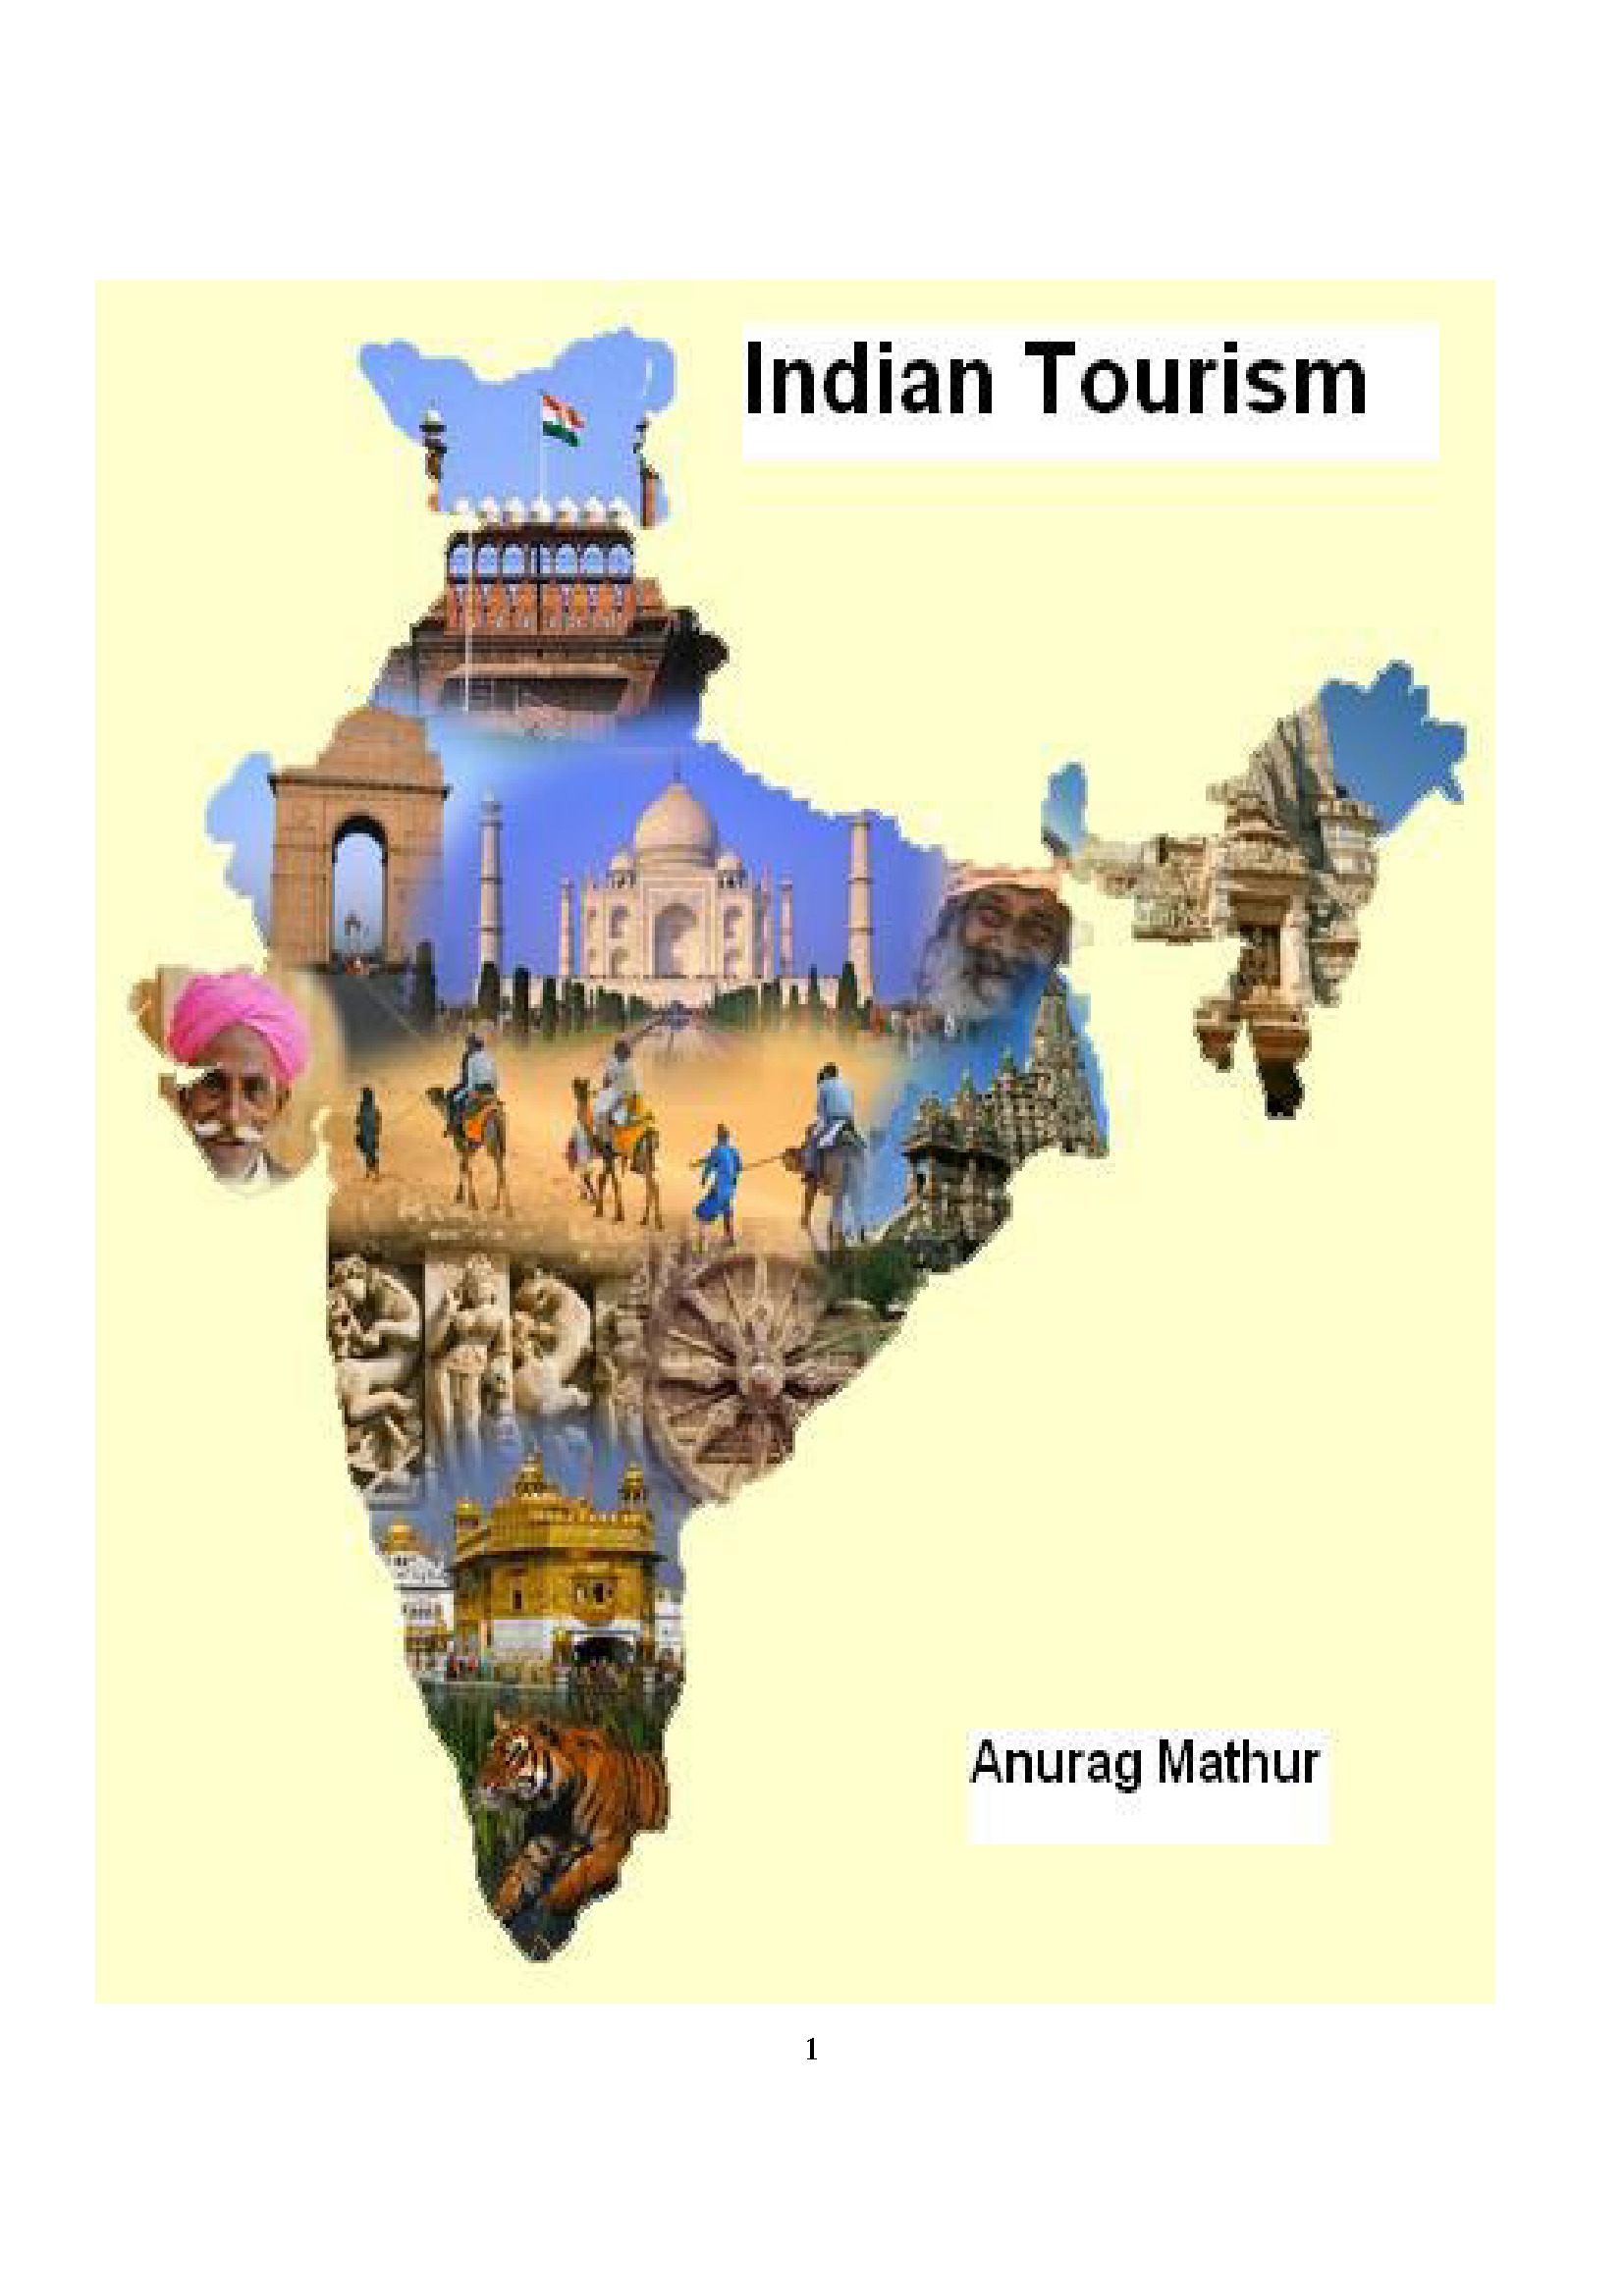 tourism in india introduction wikipedia